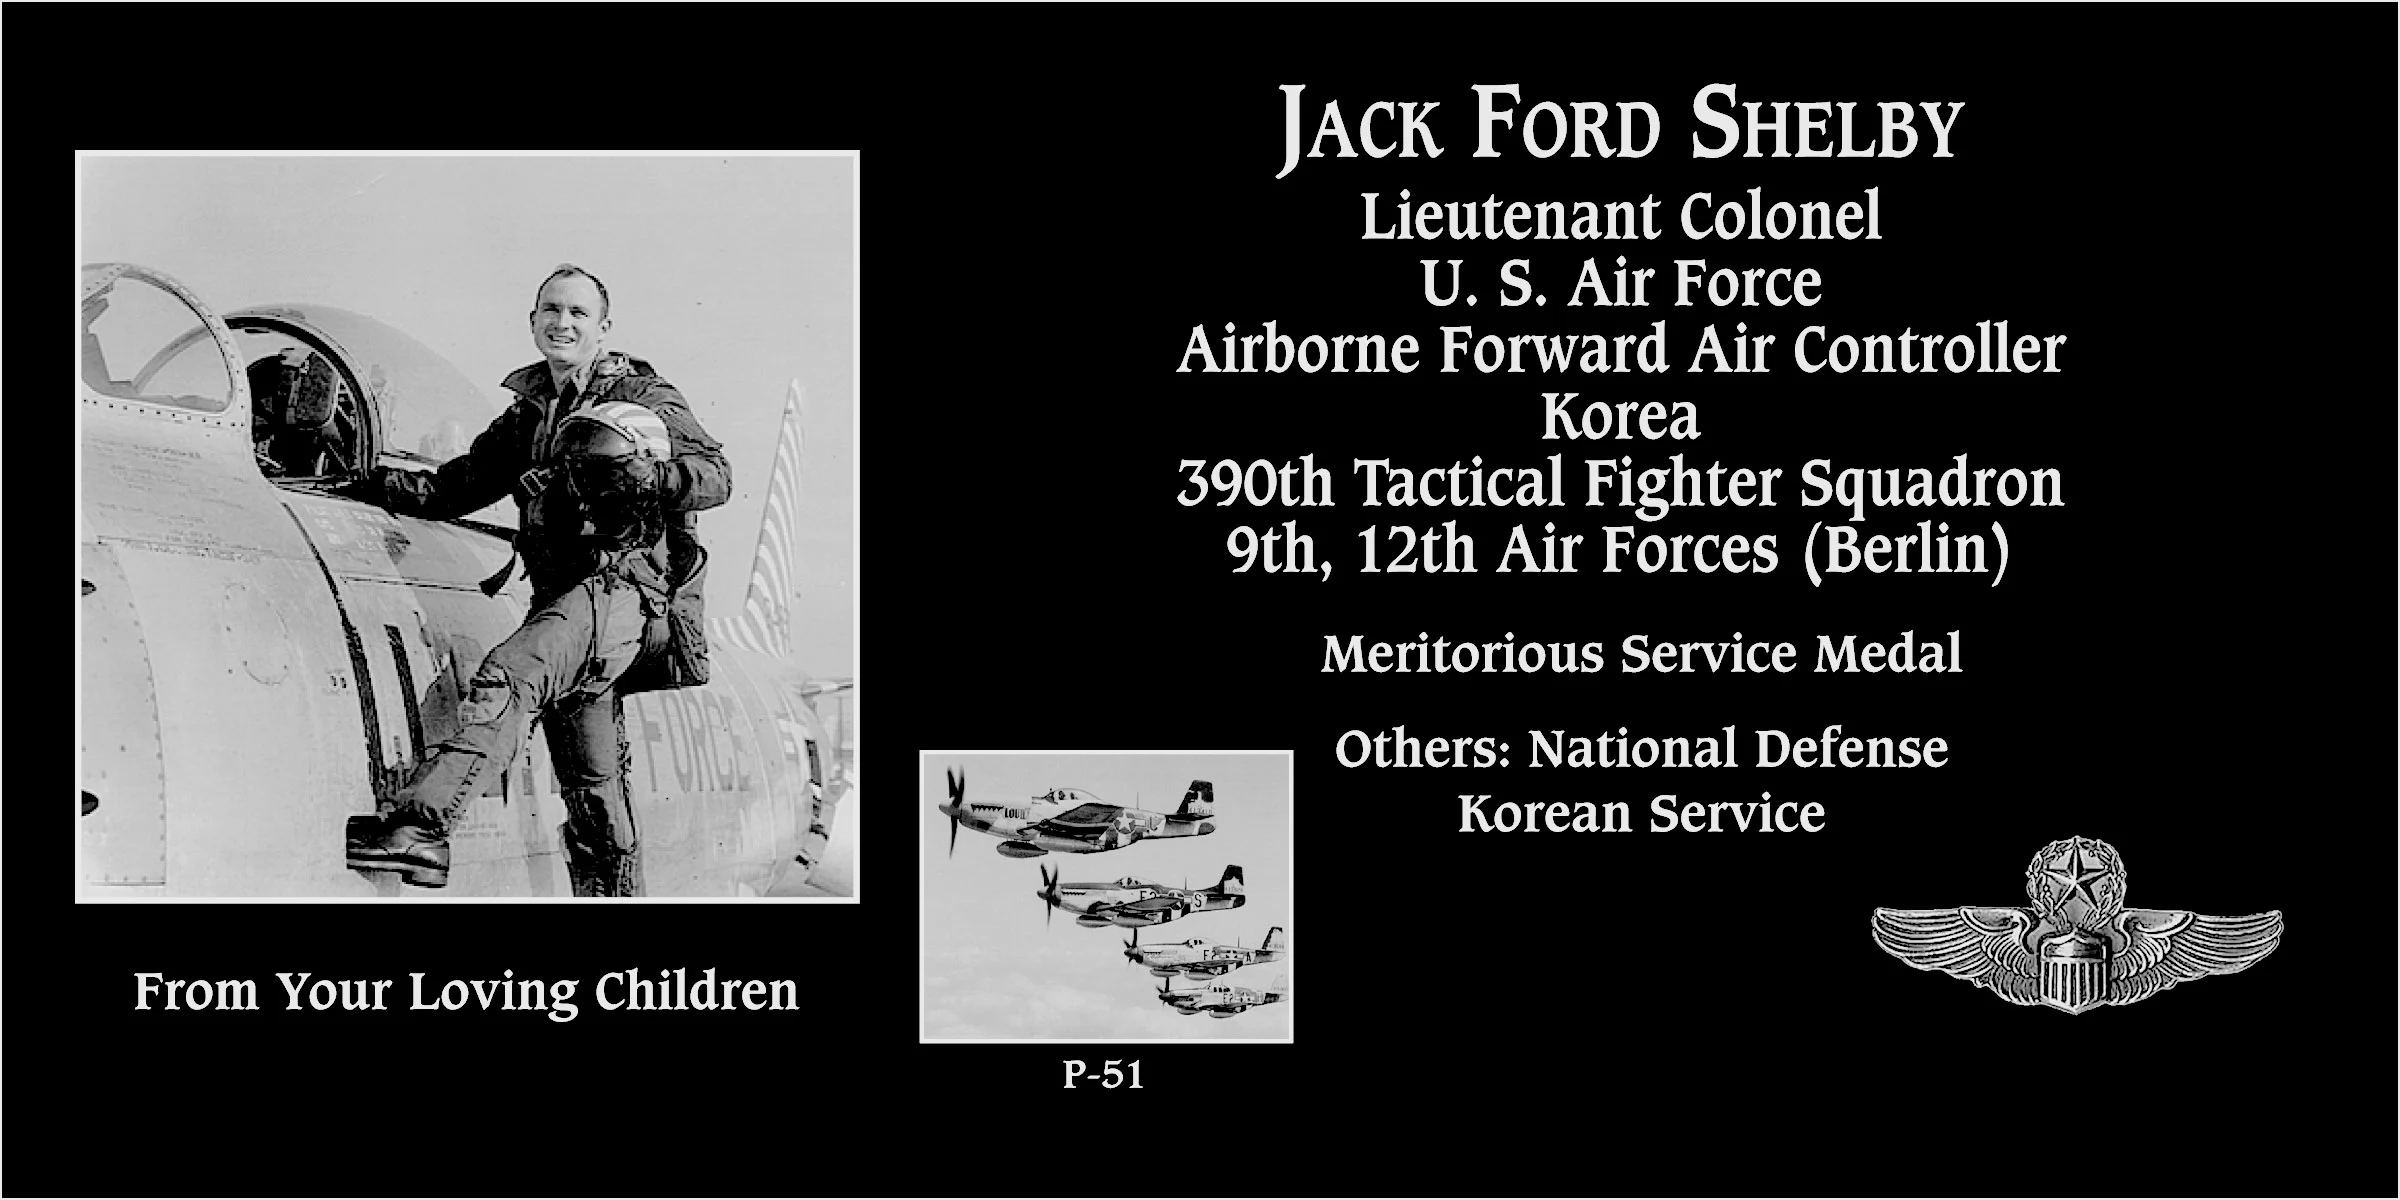 Jack Ford Shelby